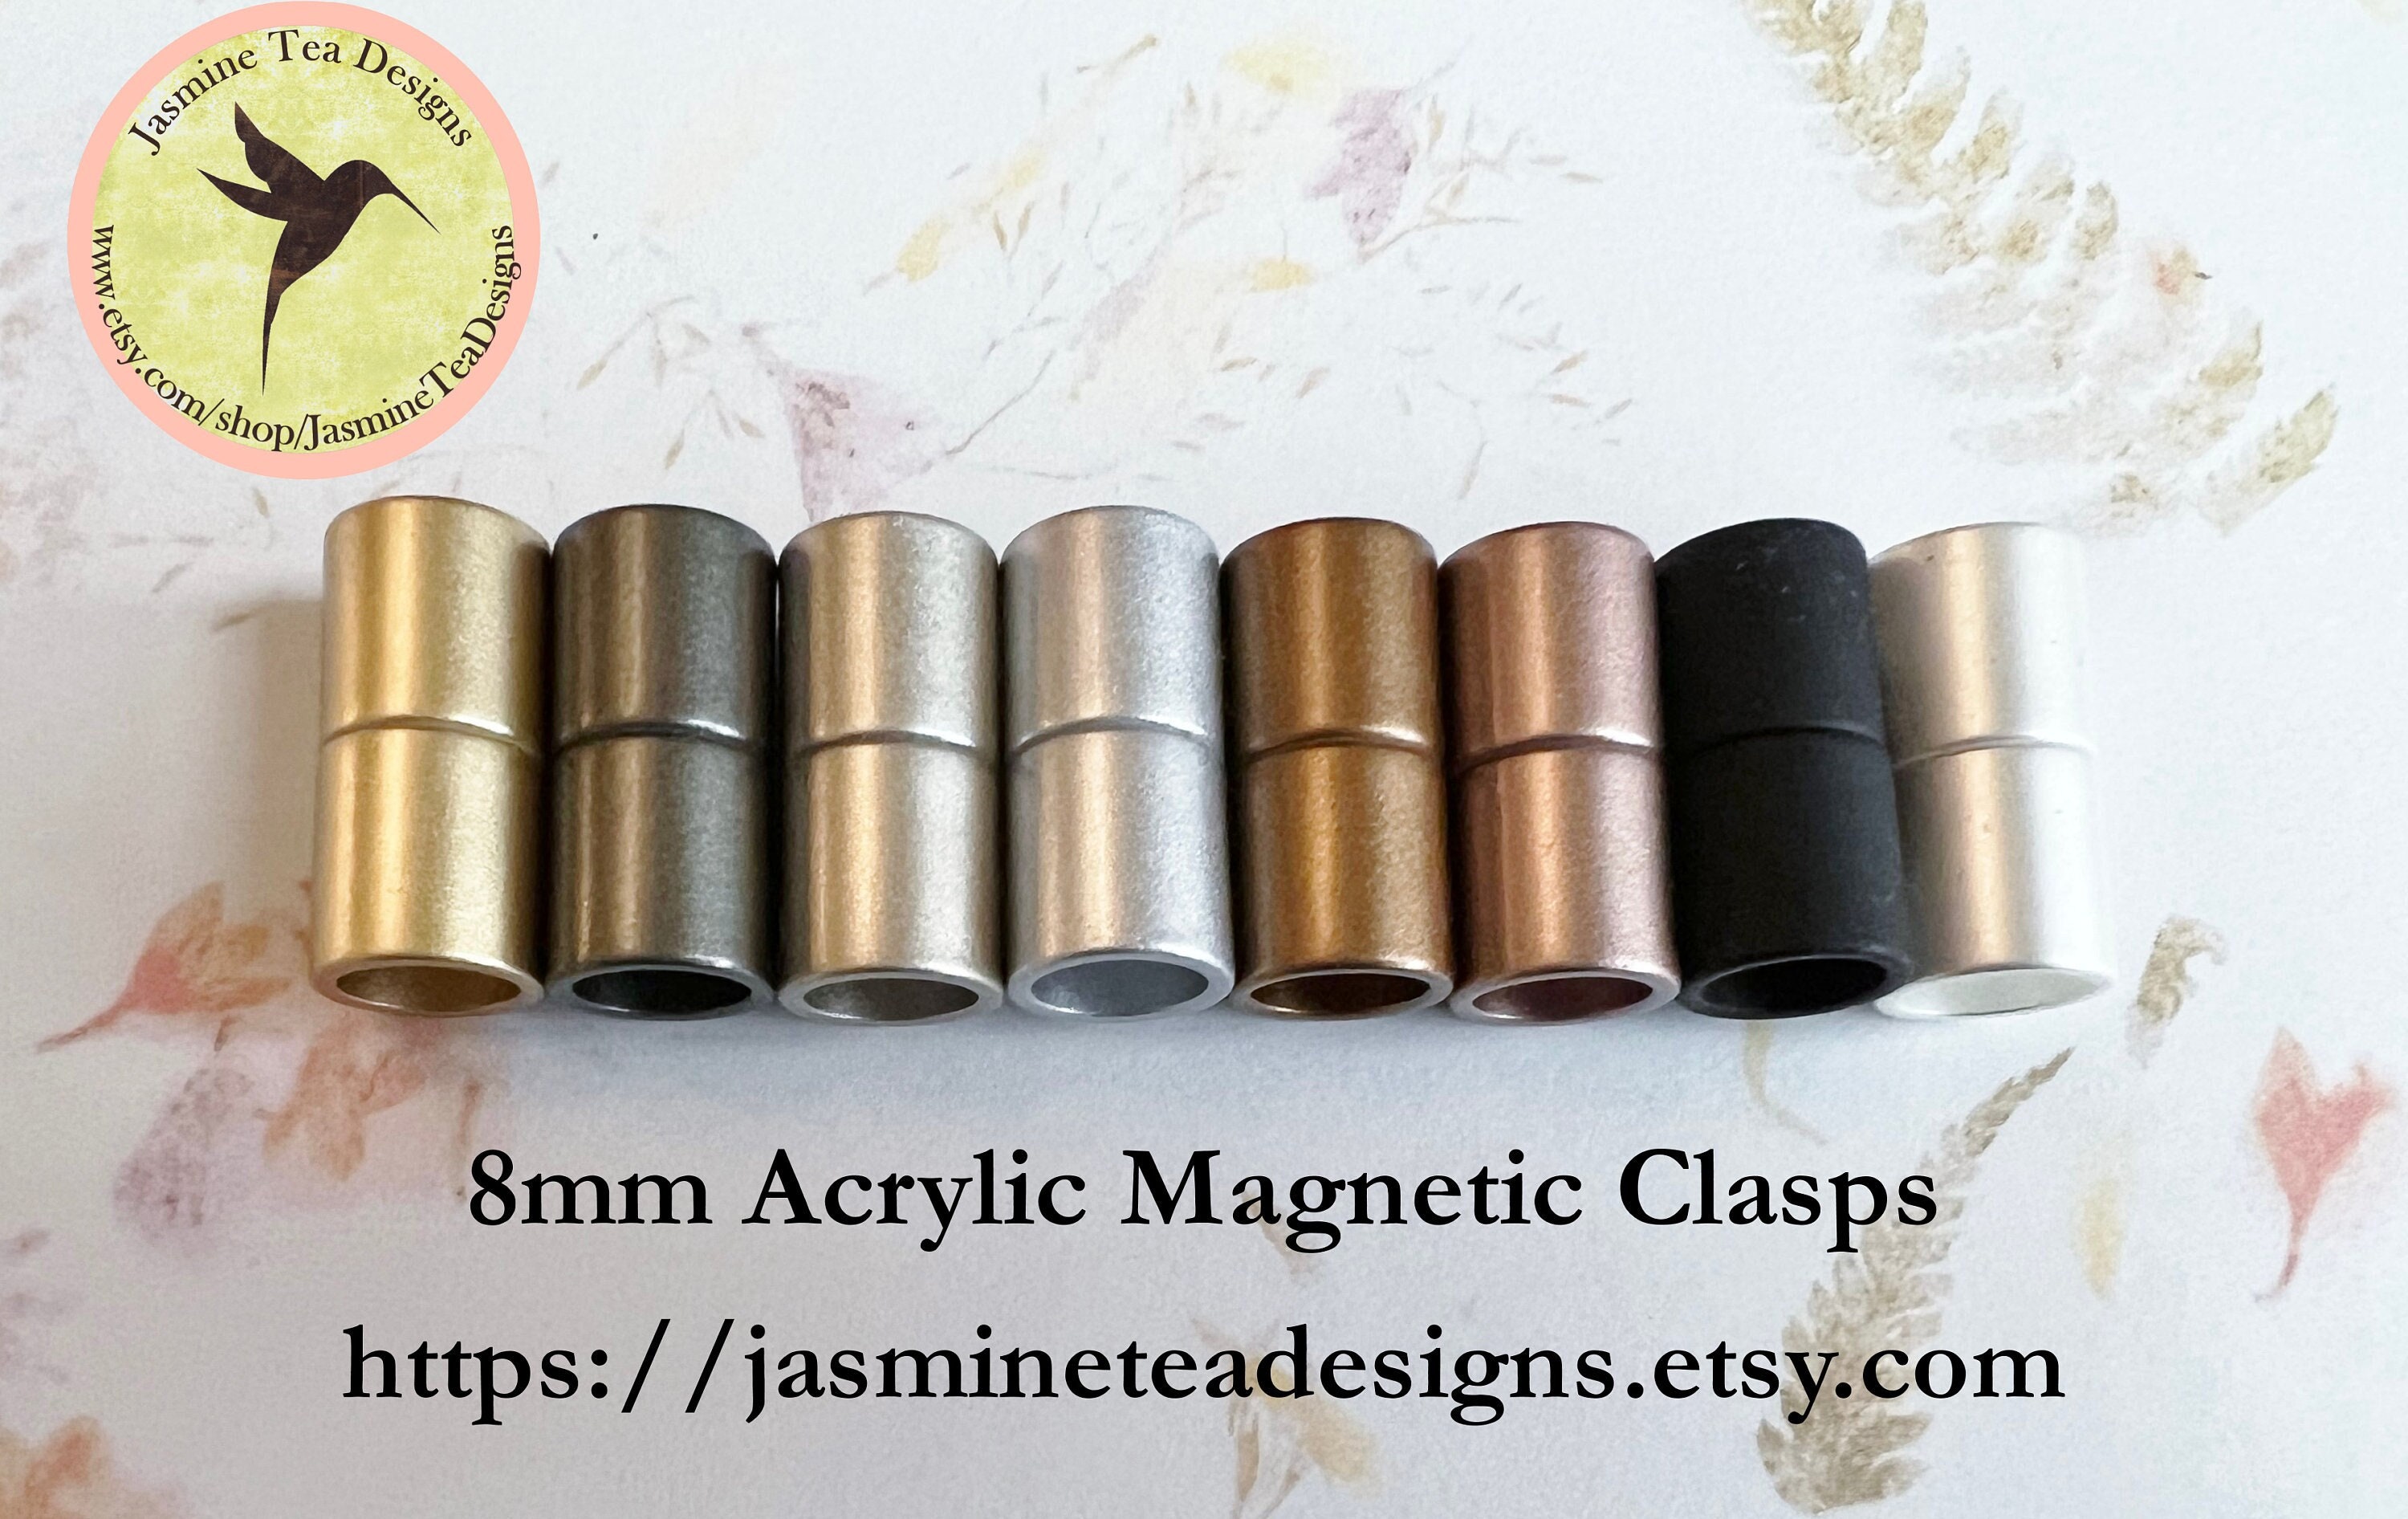 8mm Acrylic Magnetic End Cap Clasp, Acrylic Magnetic Clasp, Eight Finishes  to Chose From, Glue-in Magnetic Clasps 